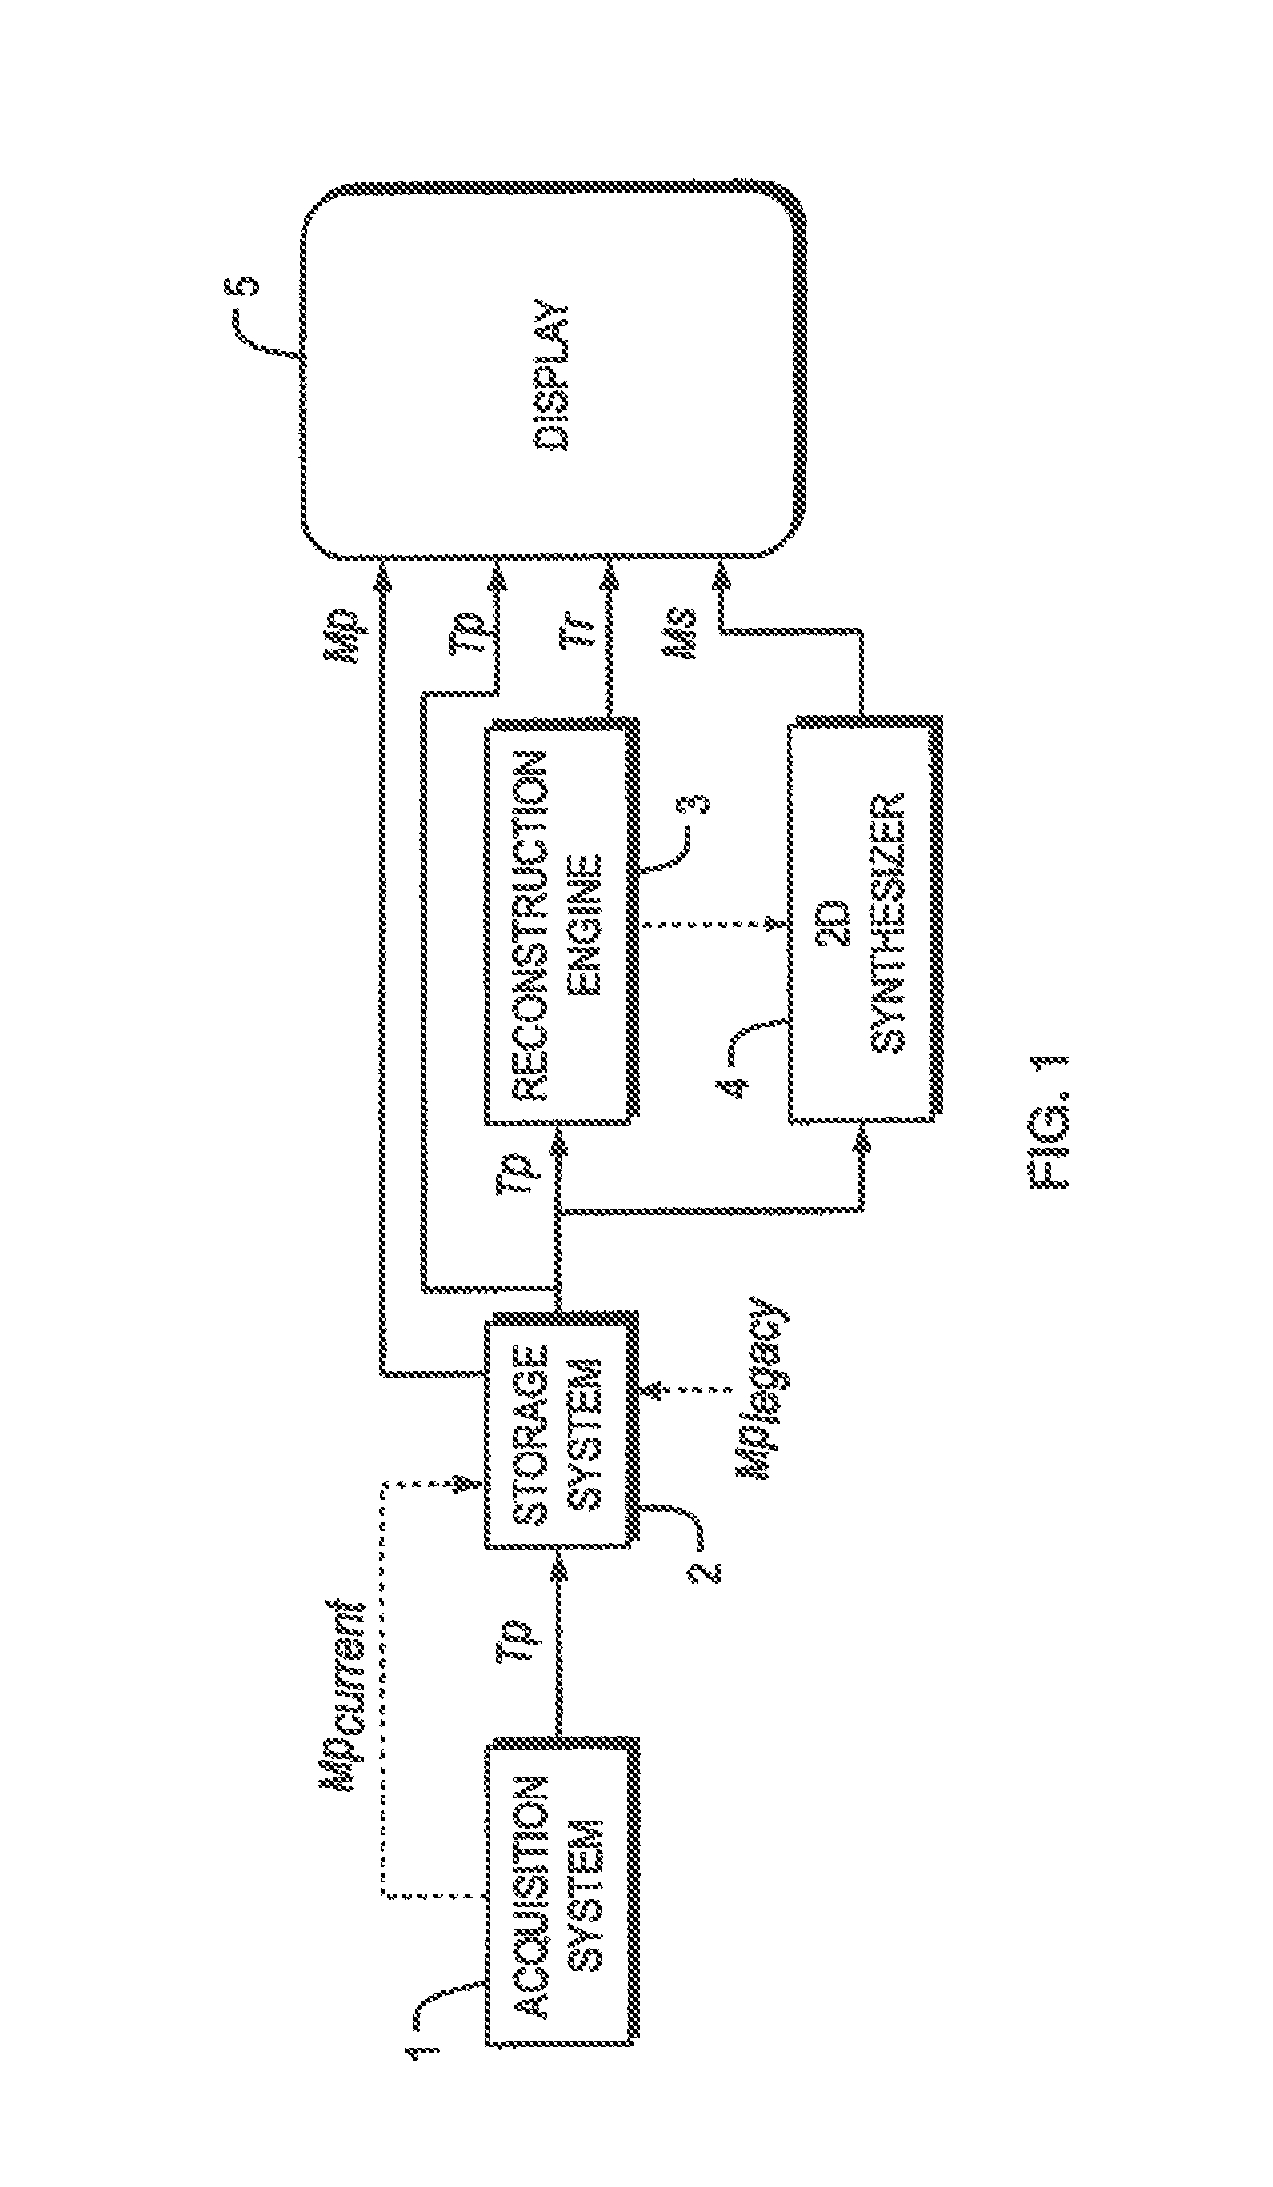 System and Method for Generating A 2D Image from a Tomosynthesis Data Set